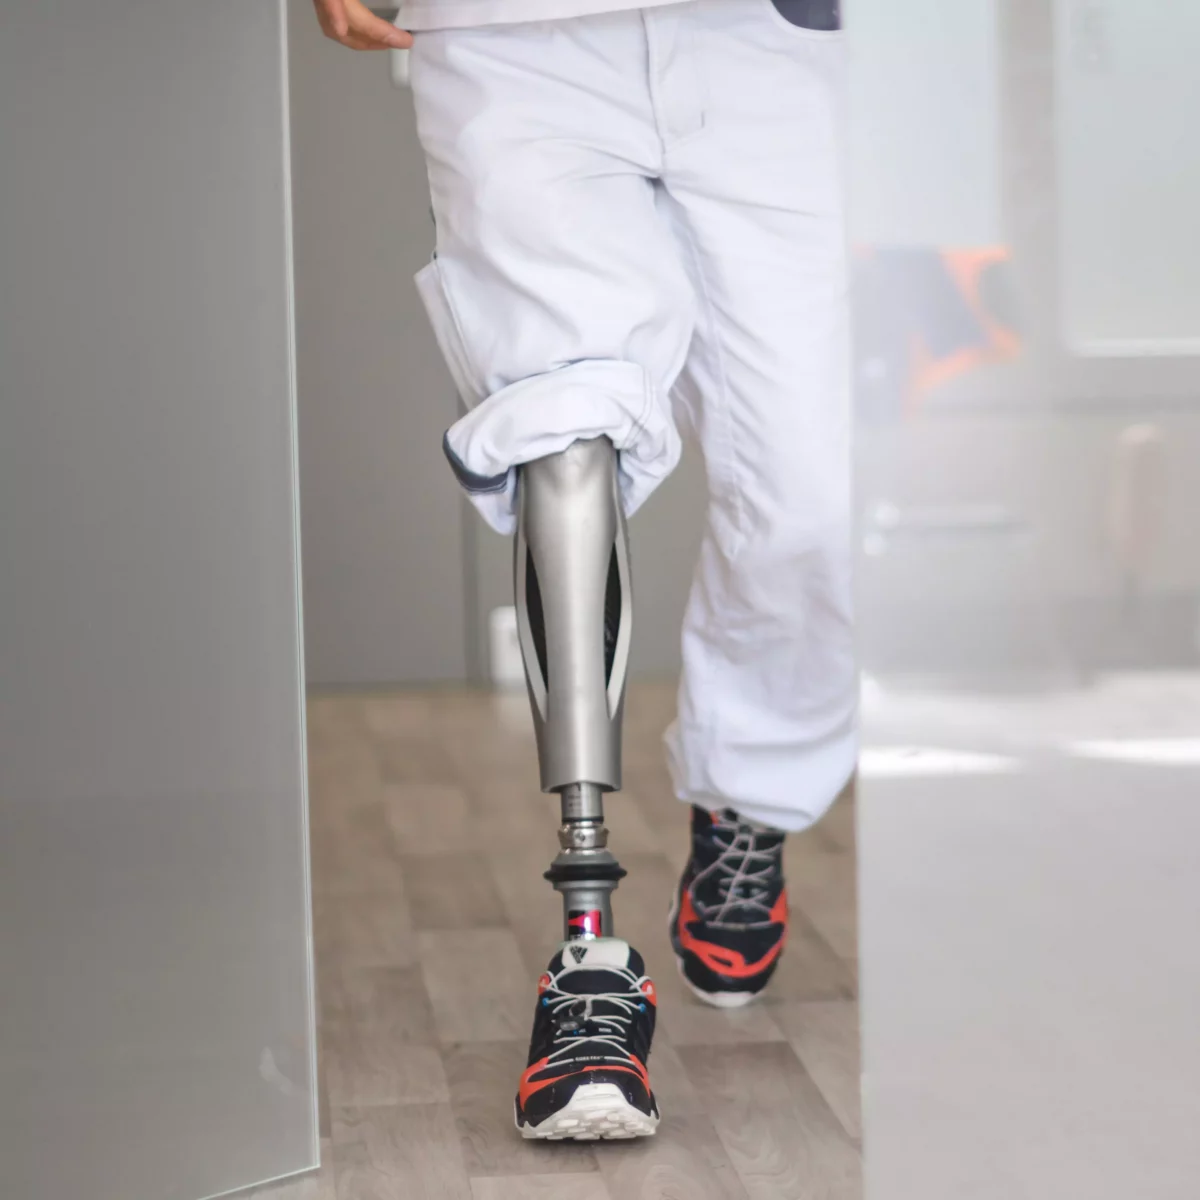 Prosthesis user wearing the Ottobock Genium Protector and walking